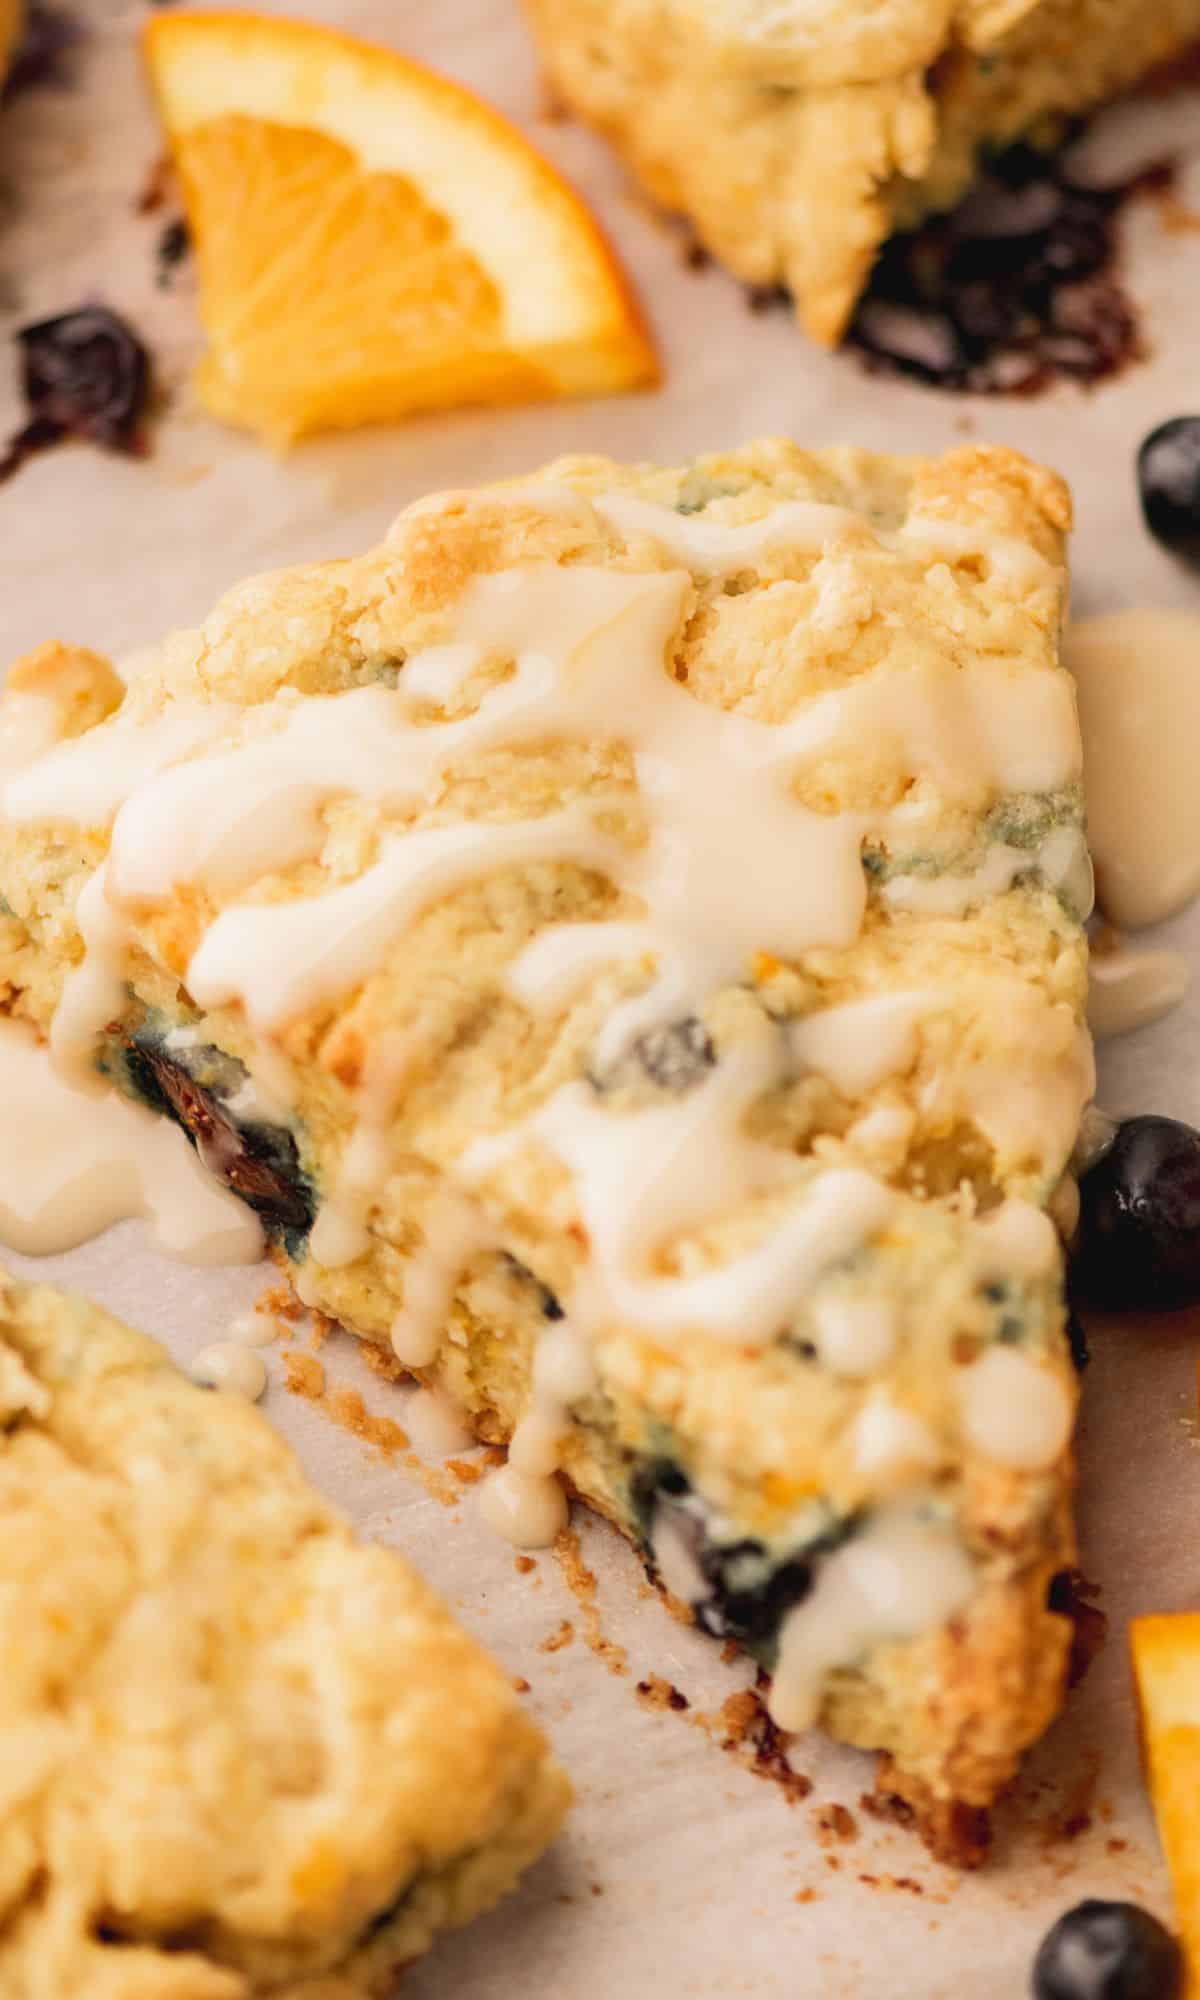 Blueberry scones on a baking sheet.